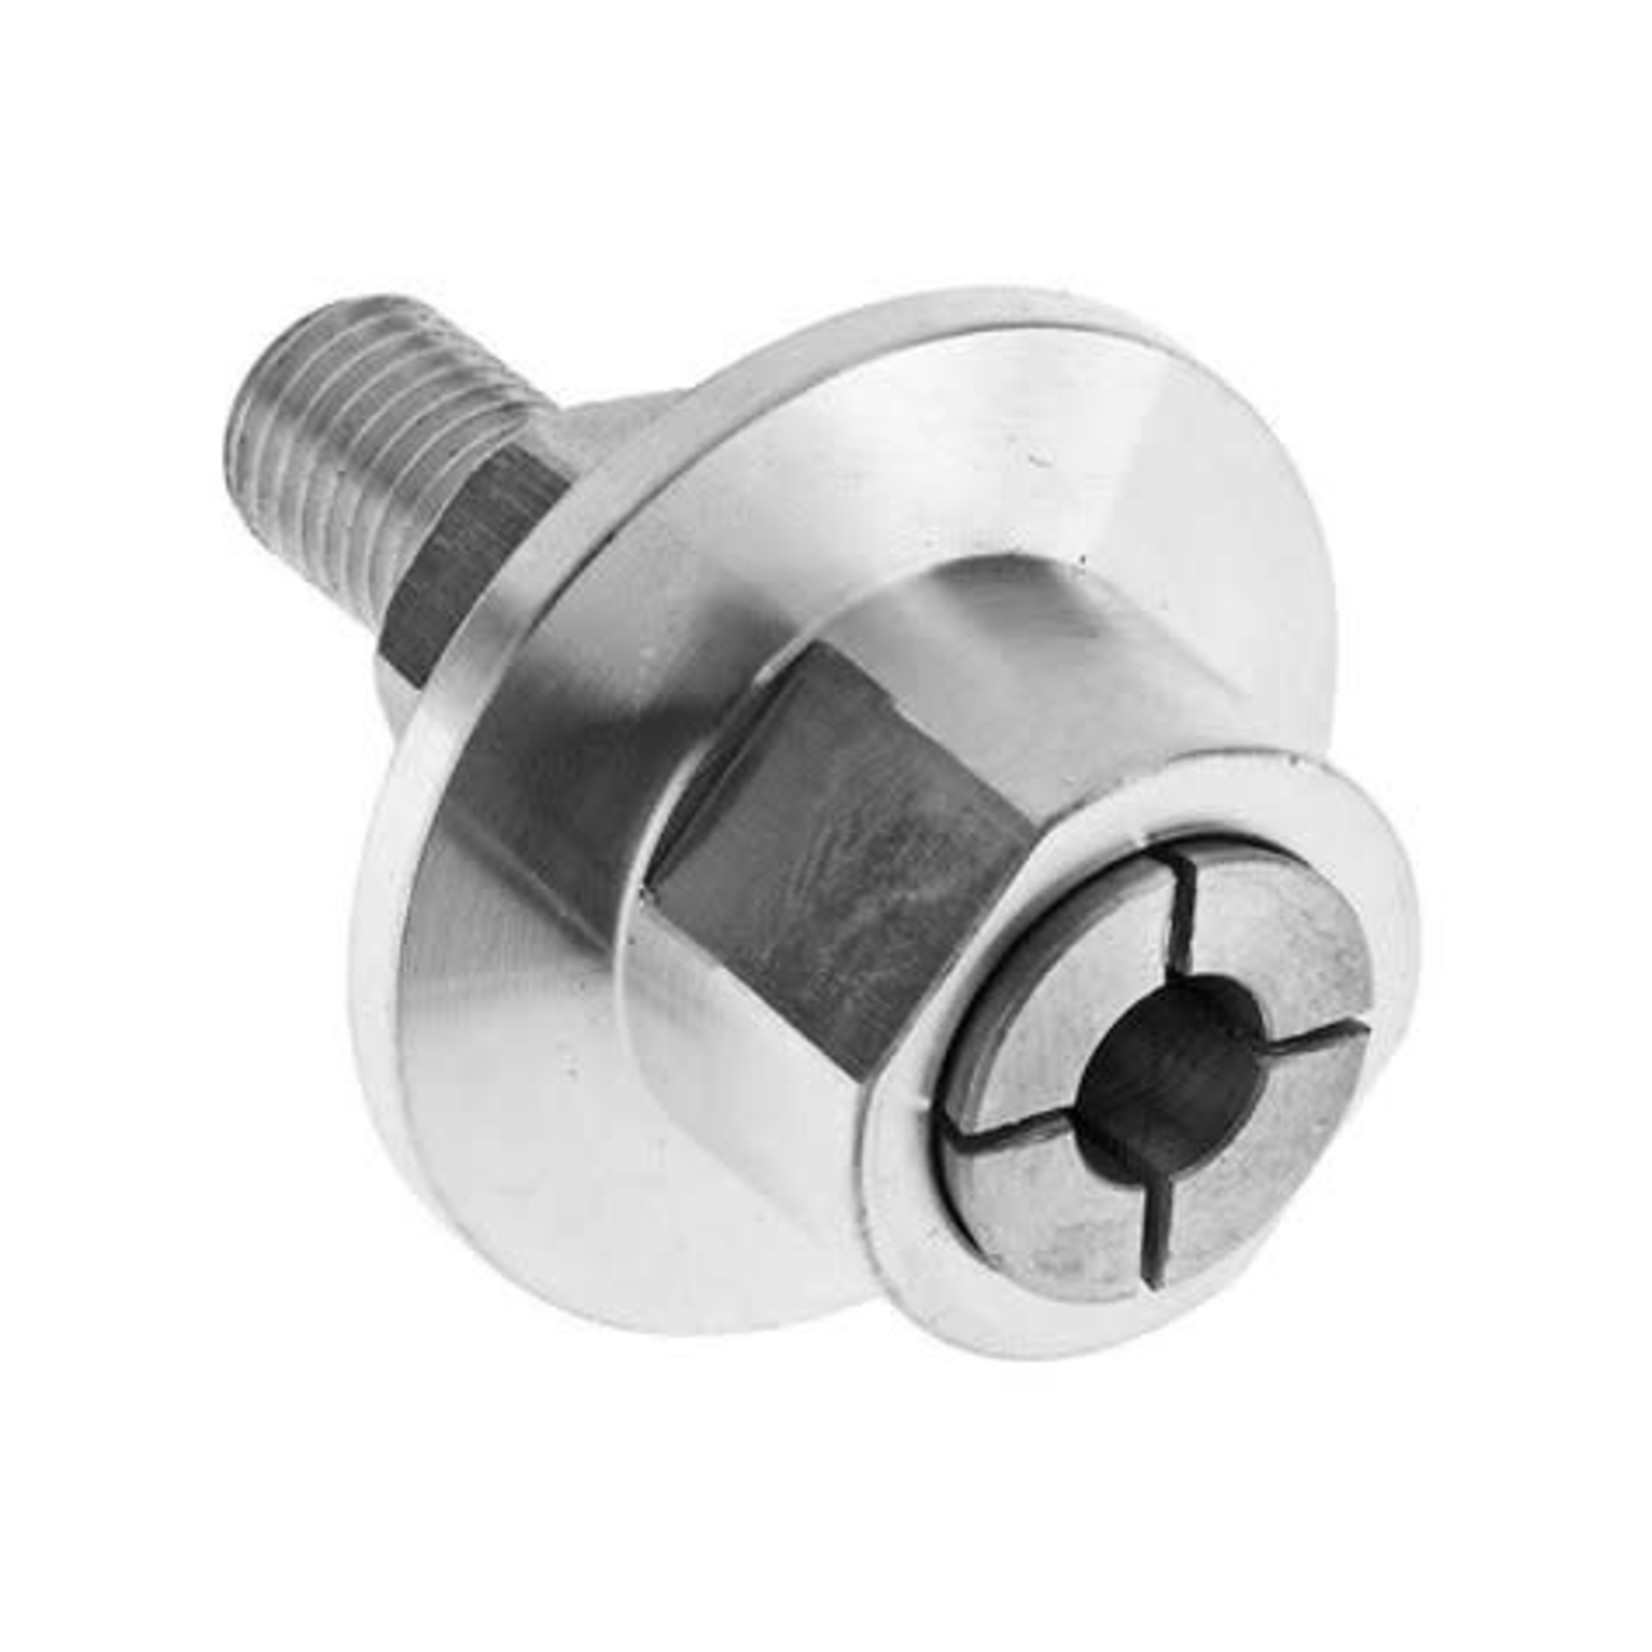 Pro Boat Collet Prop Adapter 6mm-5 16x24 Prop Shaft #GPMQ4968